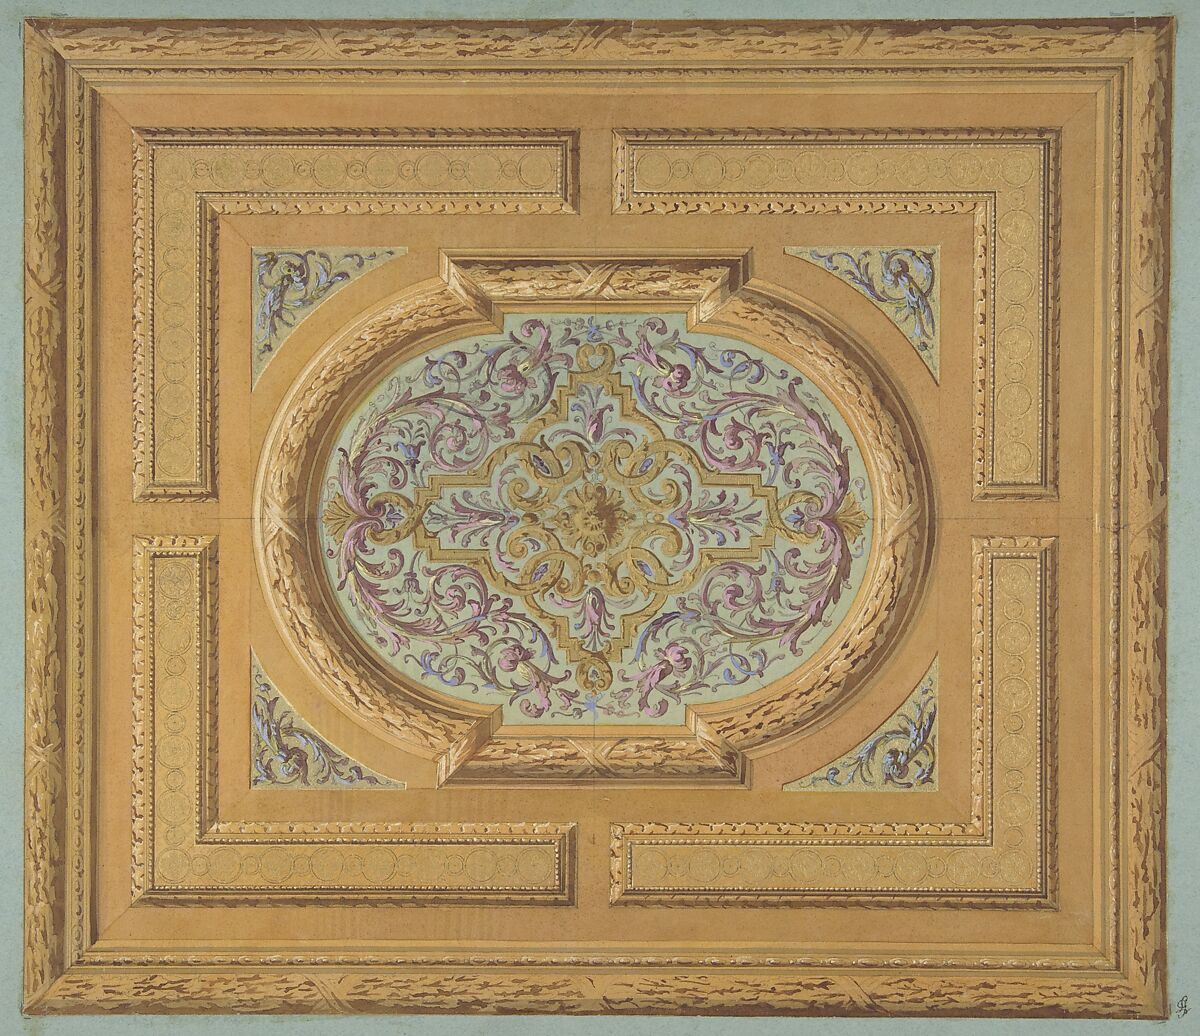 Design for a ceiling decorated with bands of oak leaves and a central panel of scrolls and rinceaux, Jules-Edmond-Charles Lachaise (French, died 1897), Watercolor, gouache, and gold paint over graphite on wove paper; inlaid in blue wove paper 